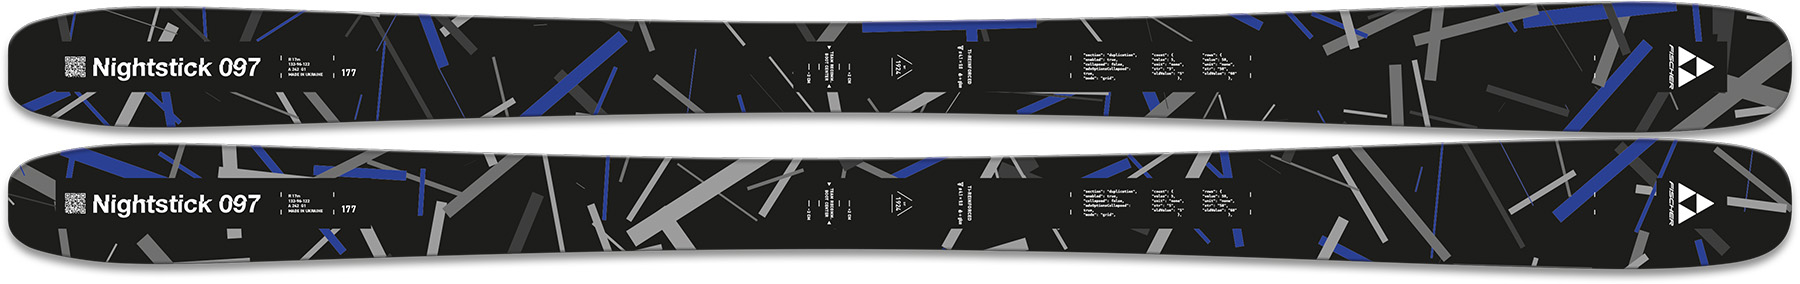 Fischer has officially announced their 24/25 Nightstick collection, which includes four brand-new freestyle skis — Blister discusses the details.